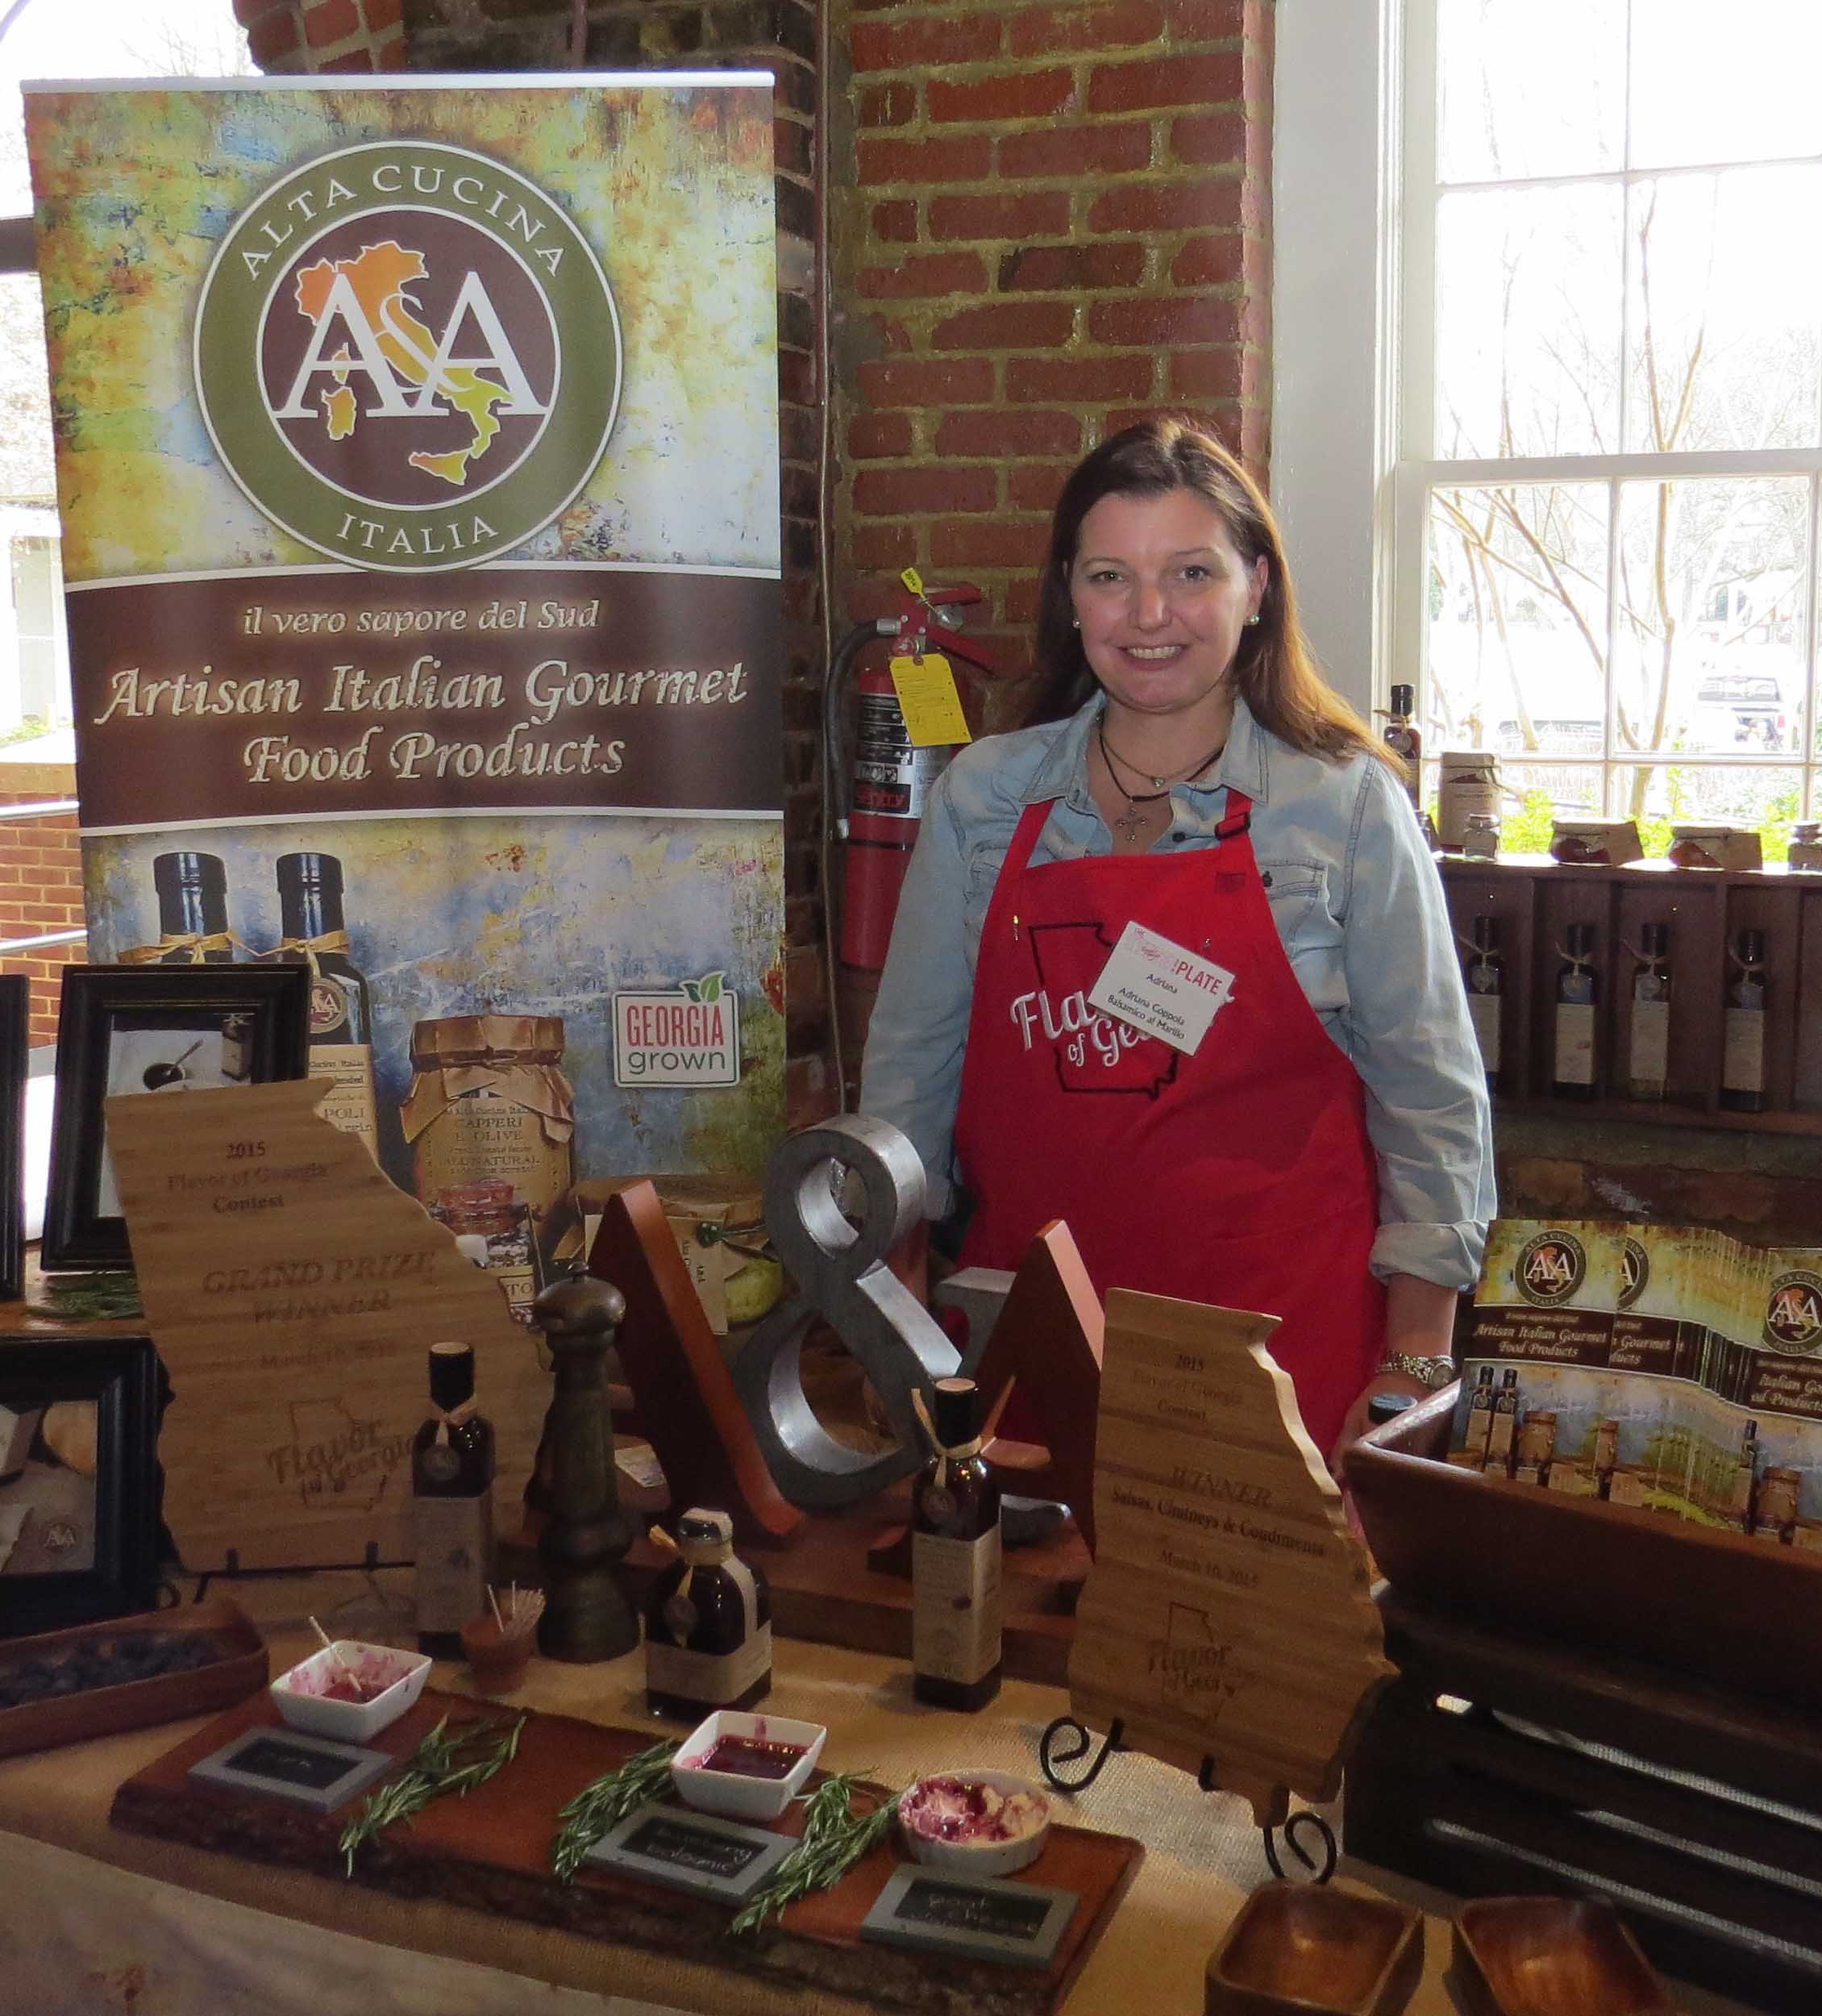 Adriana Coppola, a native Italian now living in Johns Creek, won the grand prize in the University of Georgia's 2015 Flavor of Georgia Food Product Contest with her A&A Alta Cucina Italia Balsamico al Mirtillo, a blueberry balsamic vinegar reduction.